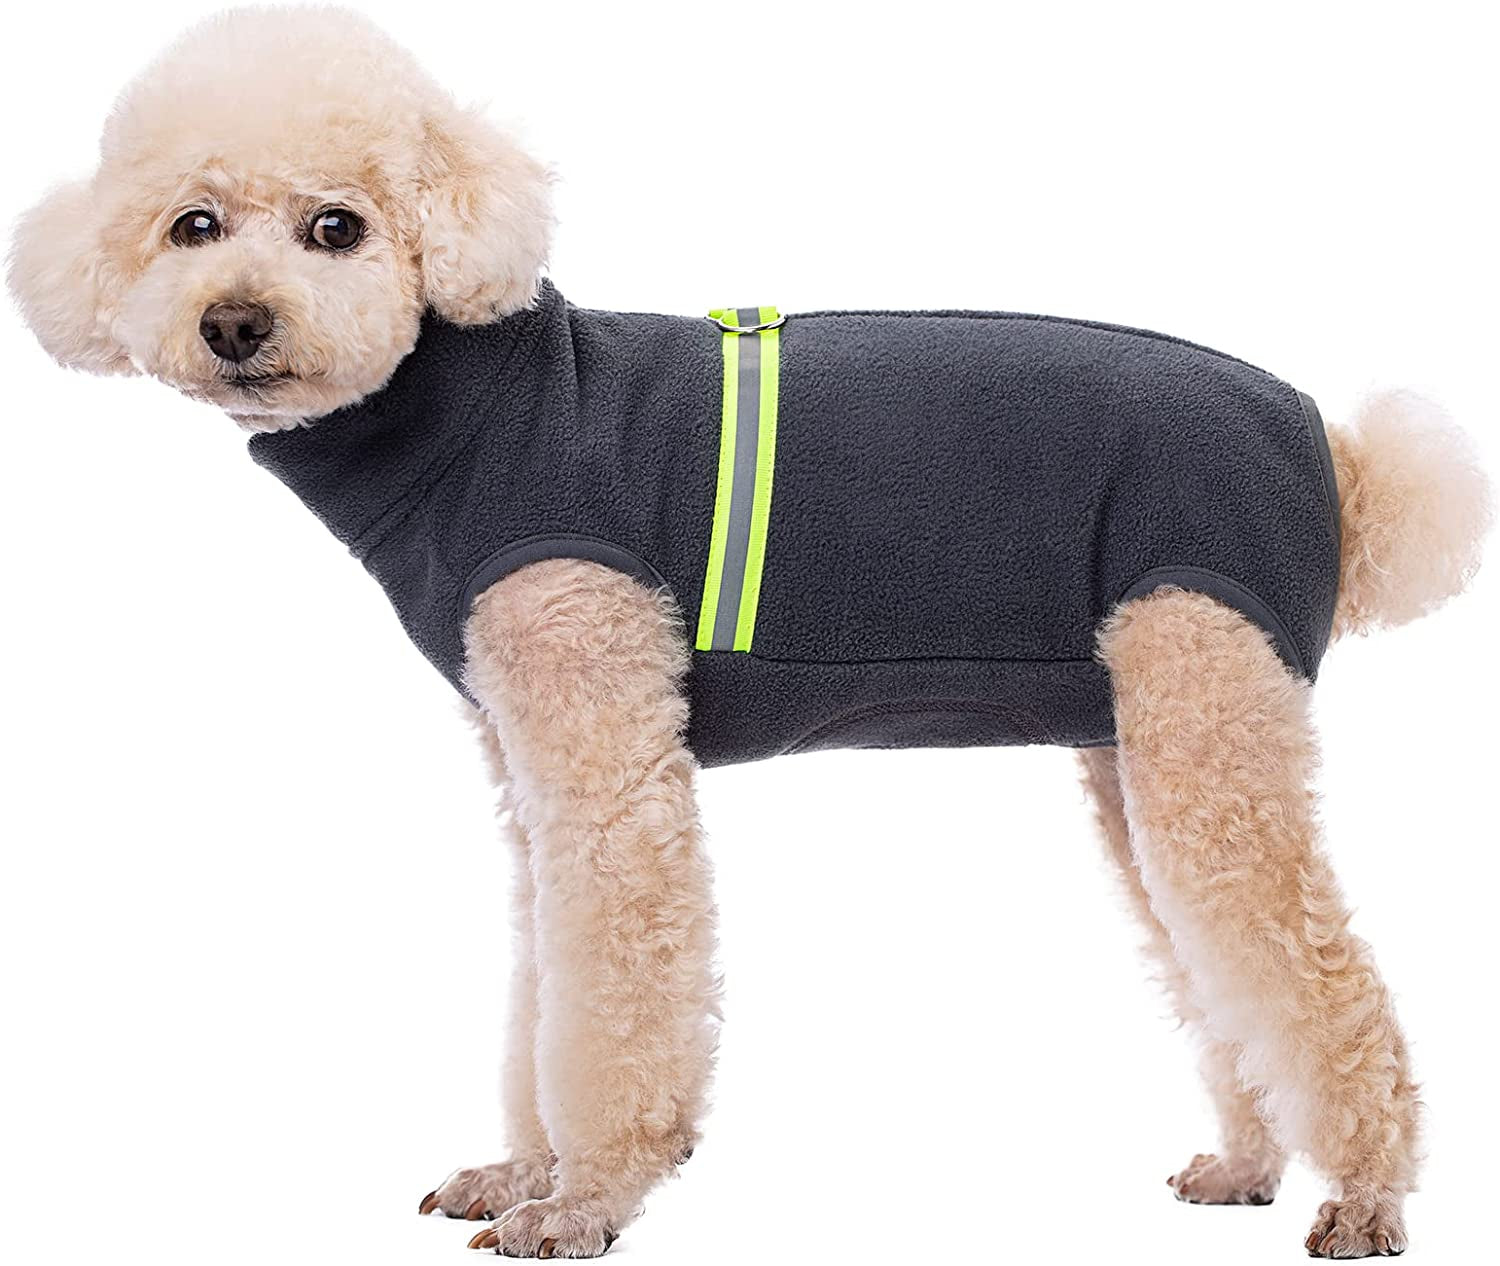 Miaododo Fleece Vest Dog Sweater with D-Ring Leash- Winter Small Dog Sweater Coat-Cold Weather Dog Clothes for Small Medium Dogs Boy/Girl(Grey,L)